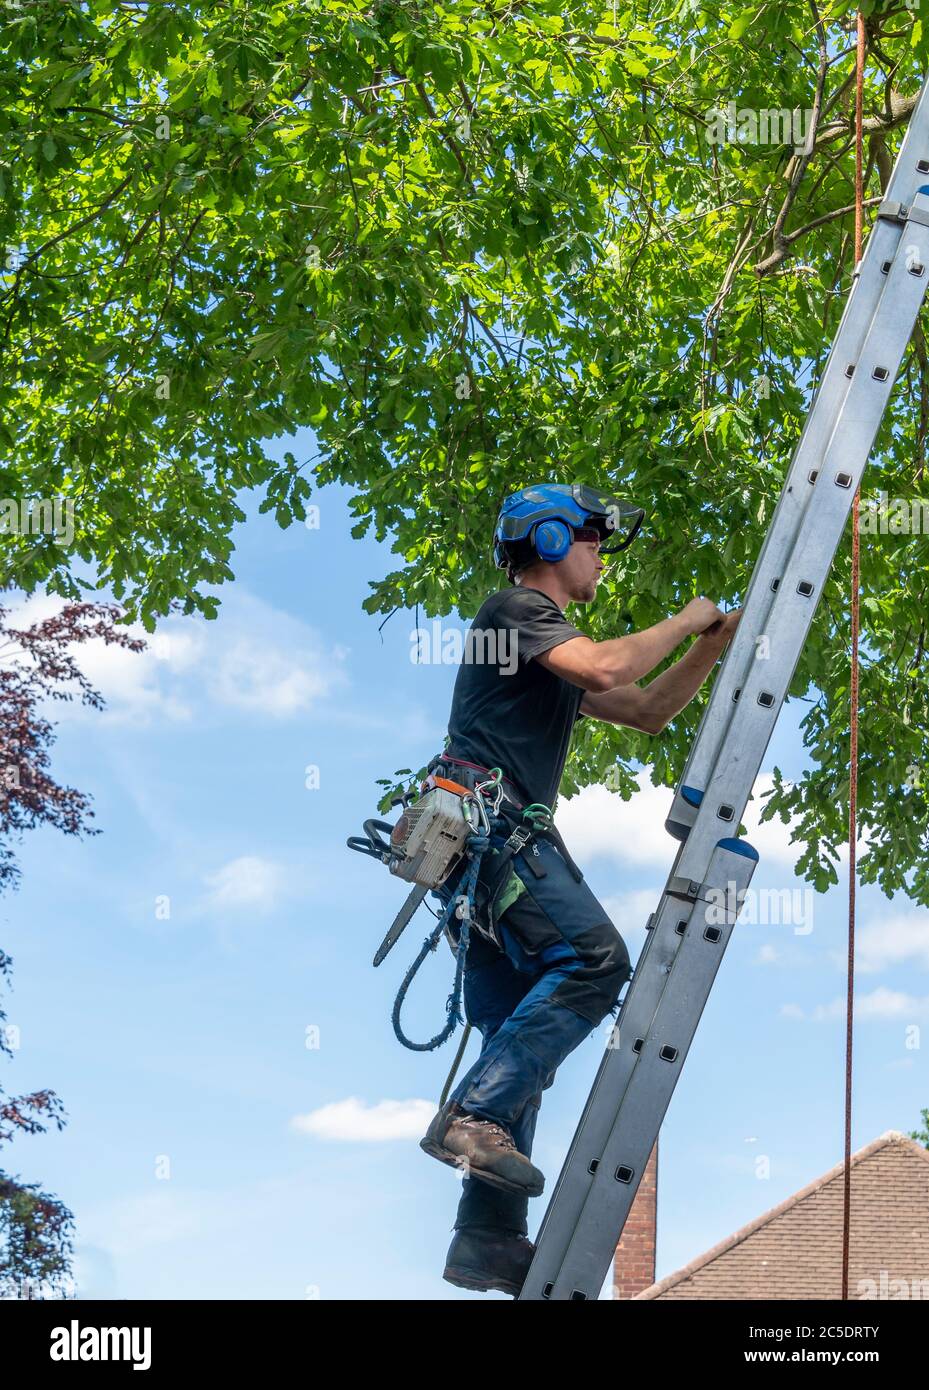 A Tree Surgeon or Arborist clinbing up a ladder ready to work up a tree. Stock Photo